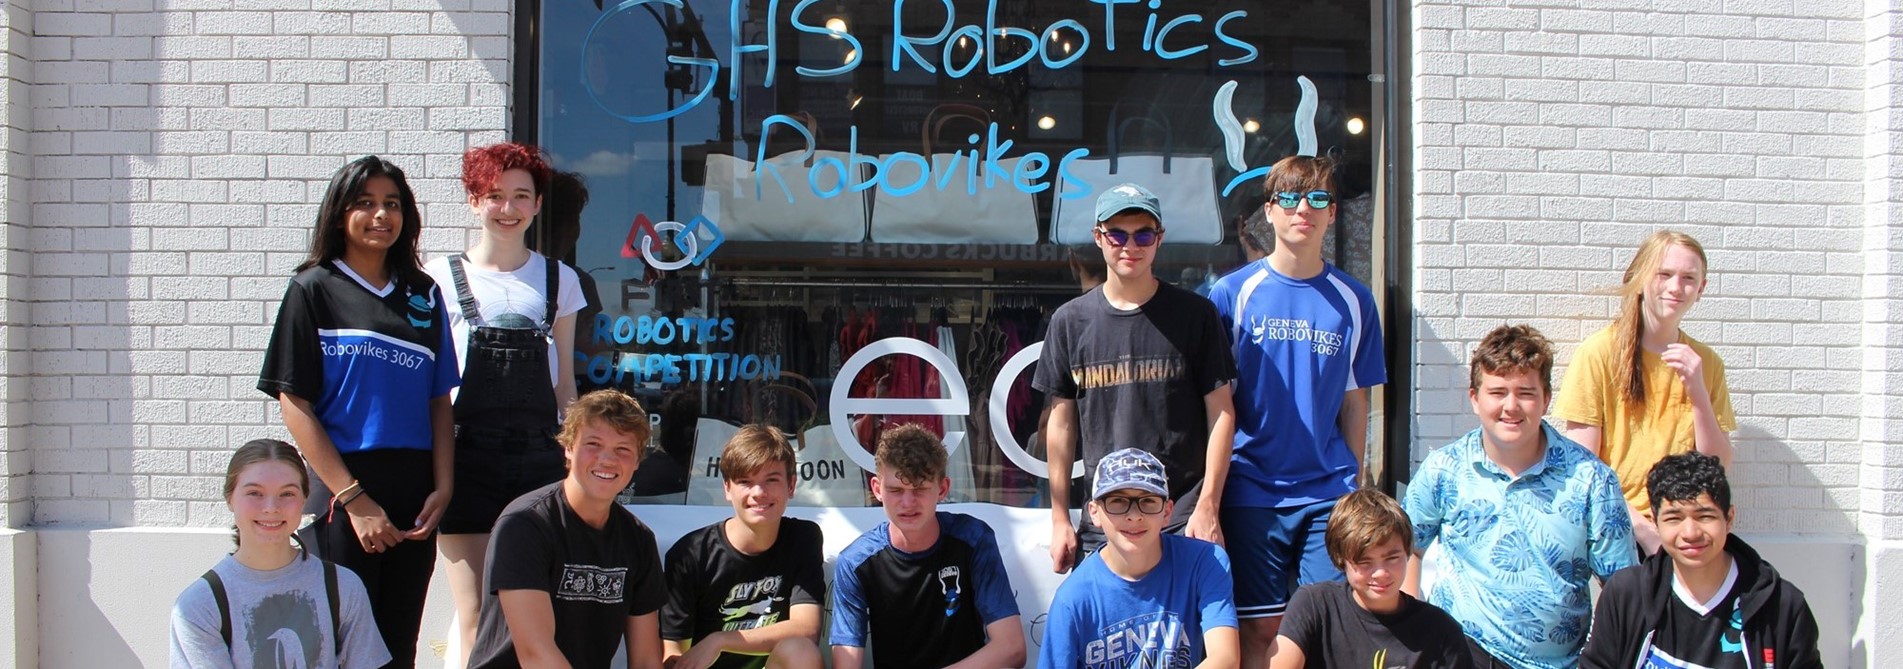 RObotics club at Paint the town for Homecoming